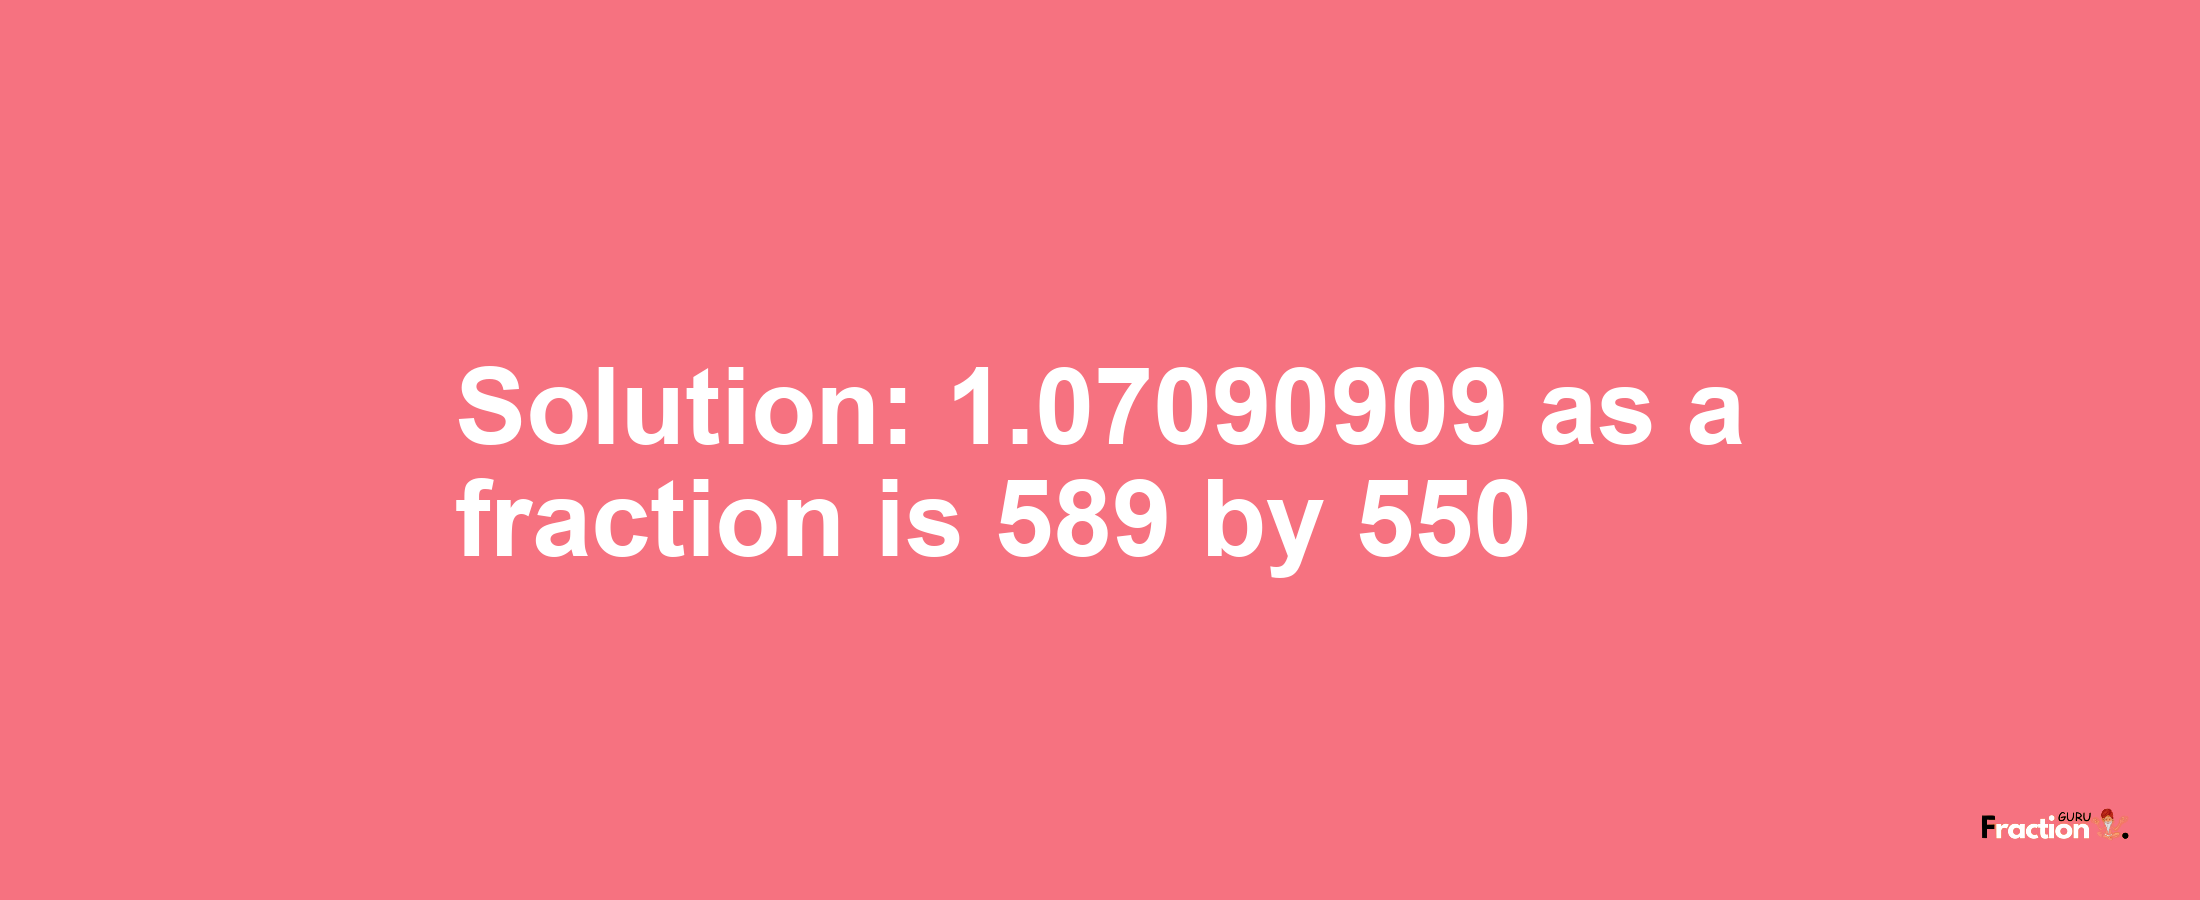 Solution:1.07090909 as a fraction is 589/550